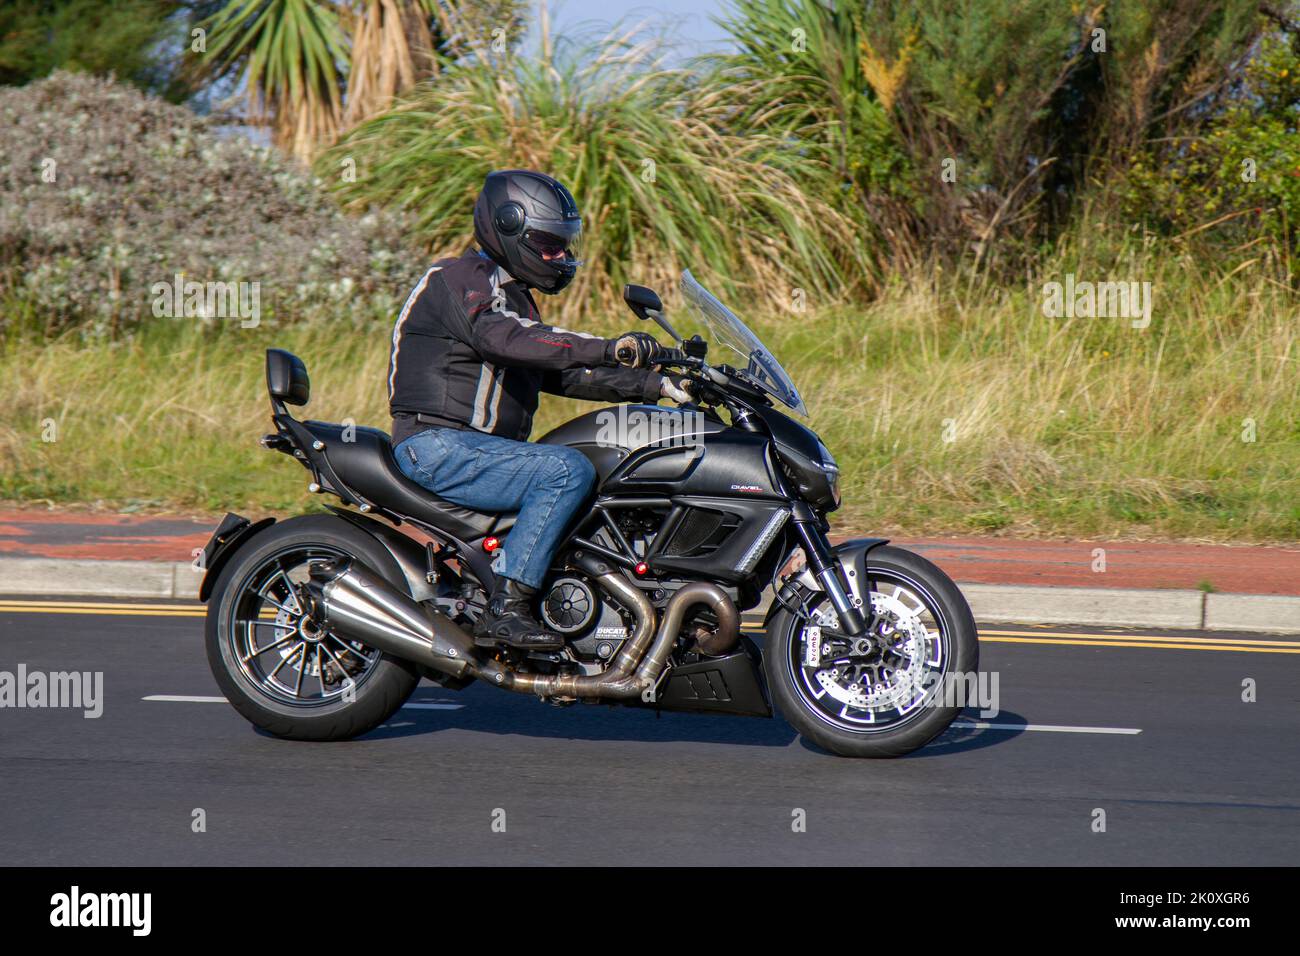 2014 DUCATI DIAVEL STRADA 1198cc; Ducati's liquid-cooled, 1,198cc Testastretta 11˚ L-twin motorcycle with V-Twin Testastretta engine travelling on the seafront promenade in Southport, Uk Stock Photo